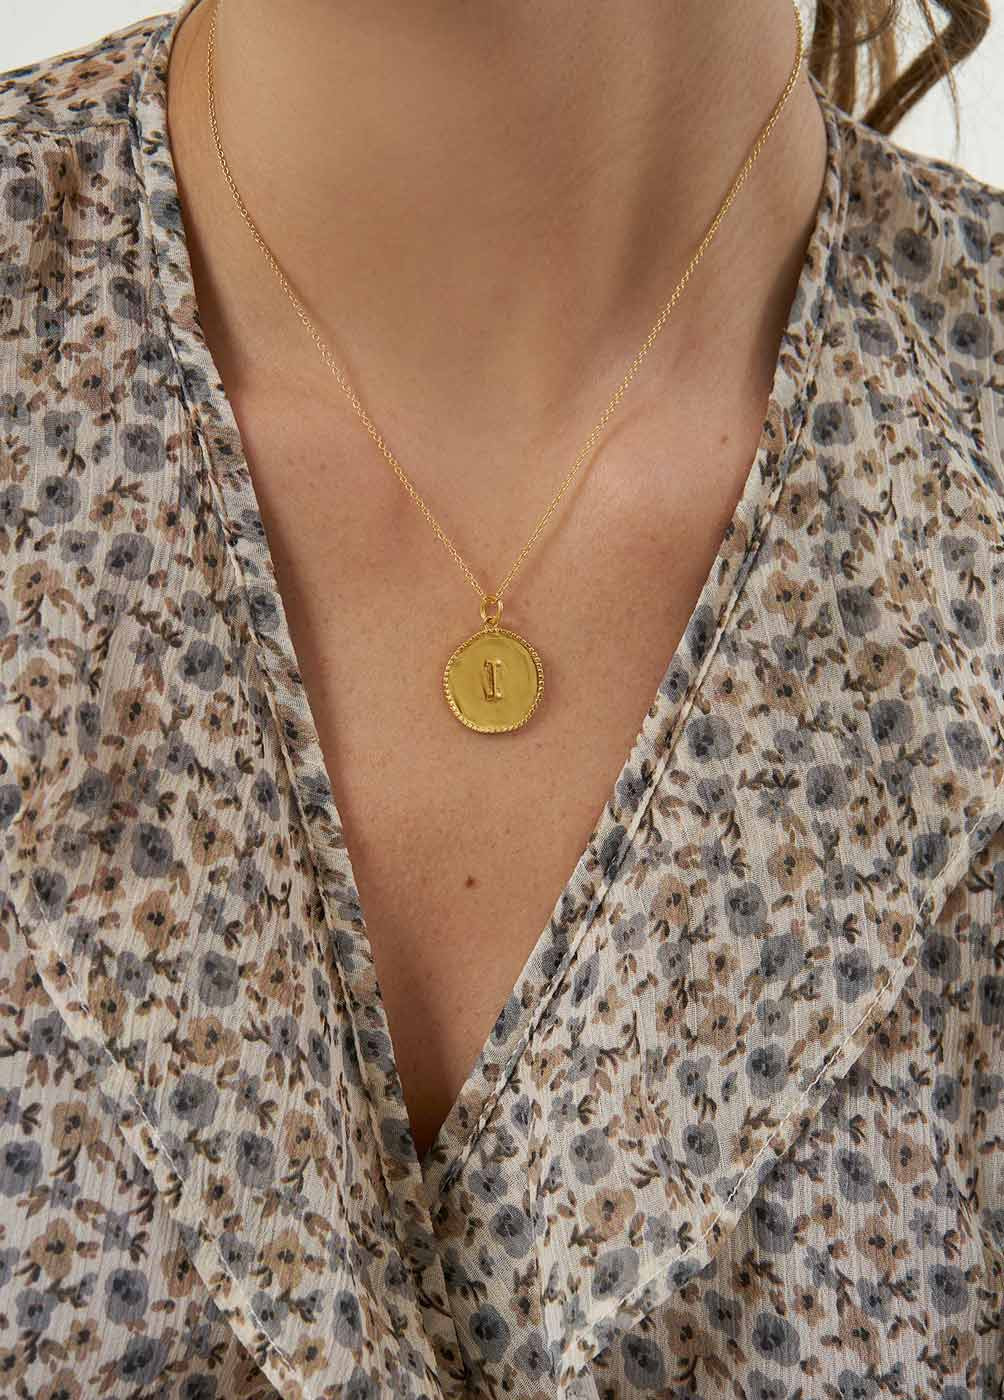 'I' INITIAL MEDALLION NECKLACE